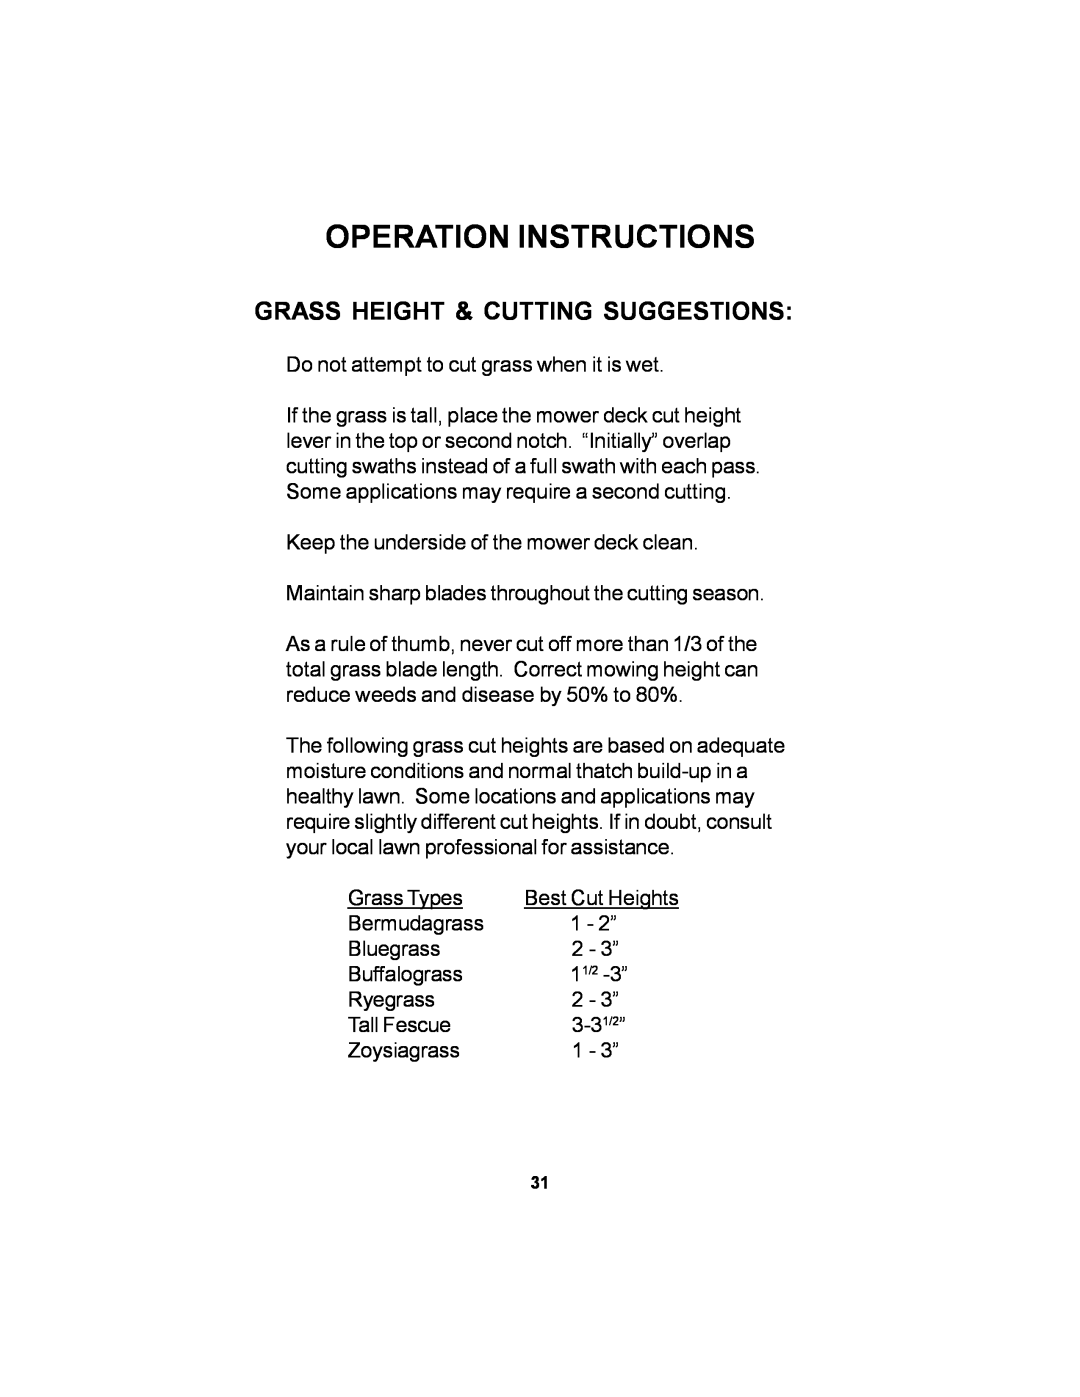 Dixon 12881-106 manual Grass Height & Cutting Suggestions, Operation Instructions 